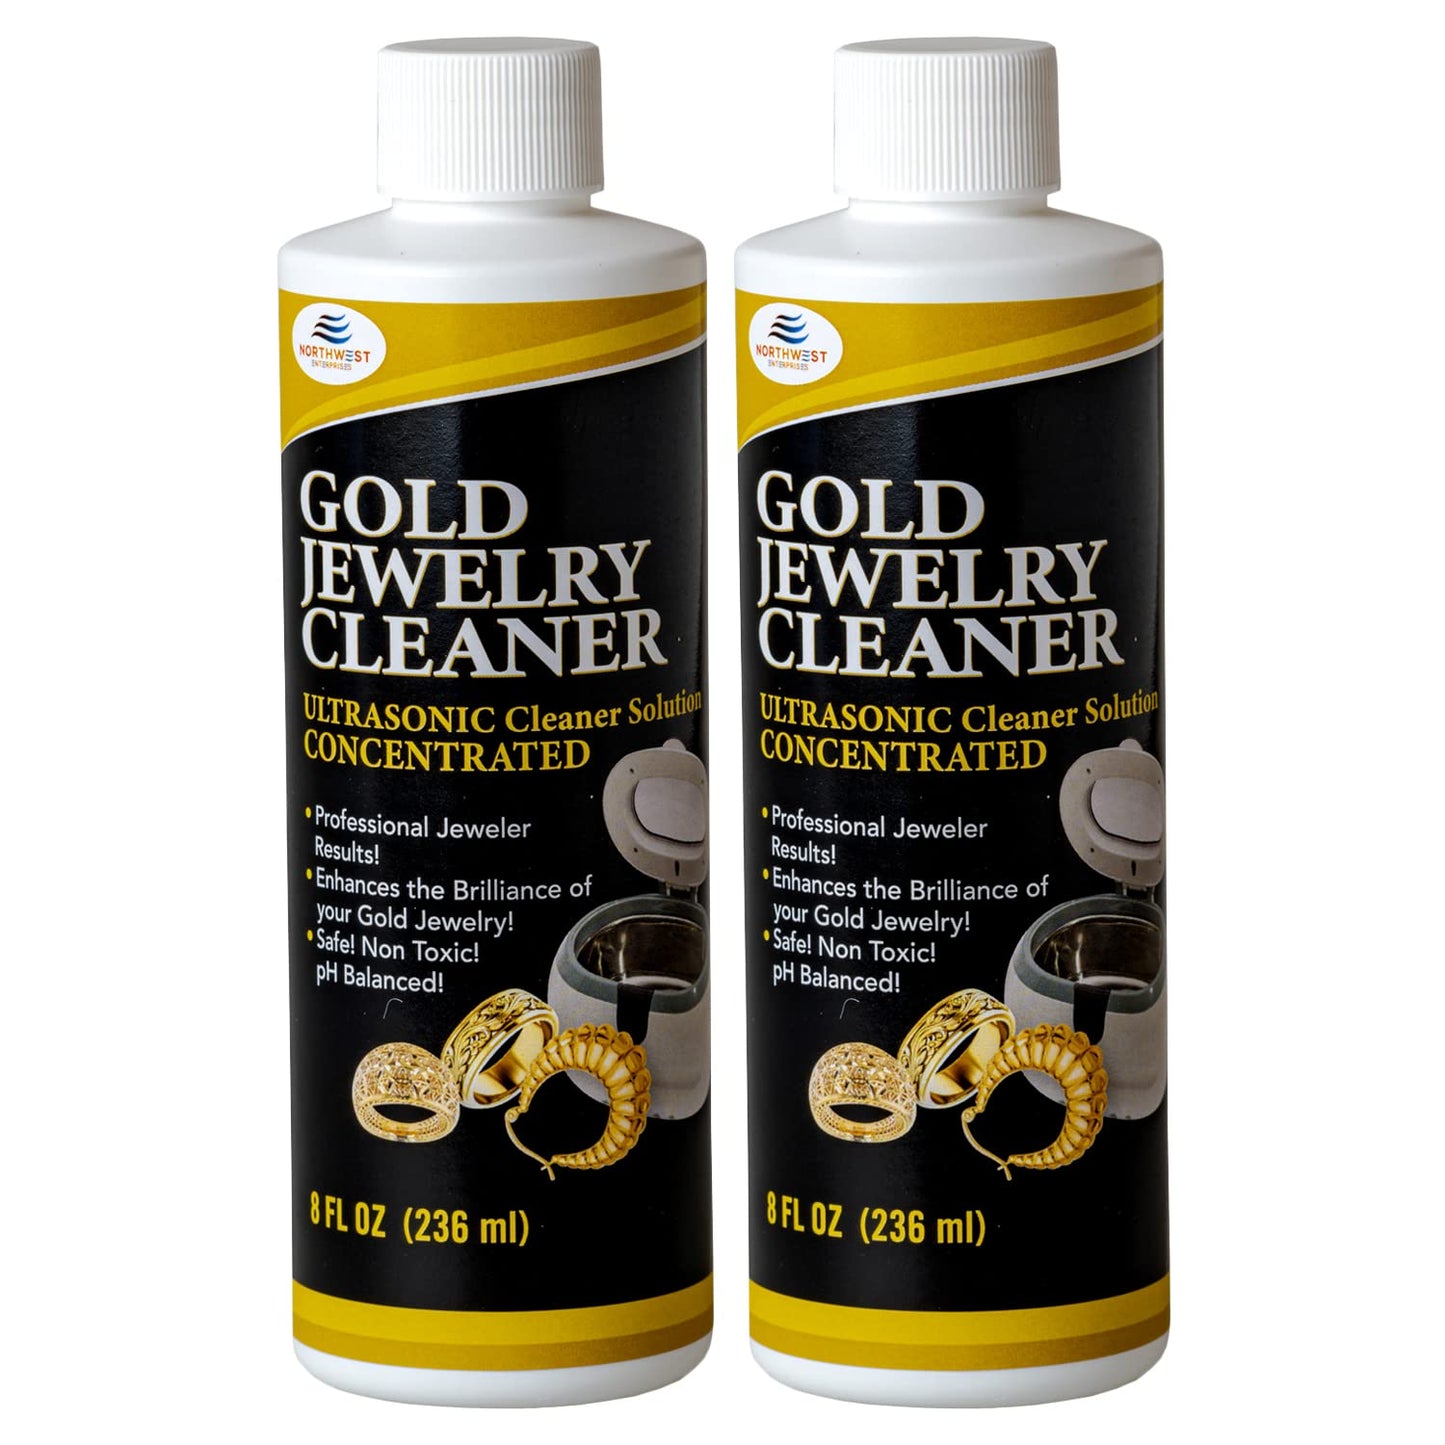 Gold Jewelry Cleaner, Ultrasonic Jewelry Cleaner Solution Concentrate Scientifically Engineered Uniquely for Gold Jewelry (2)